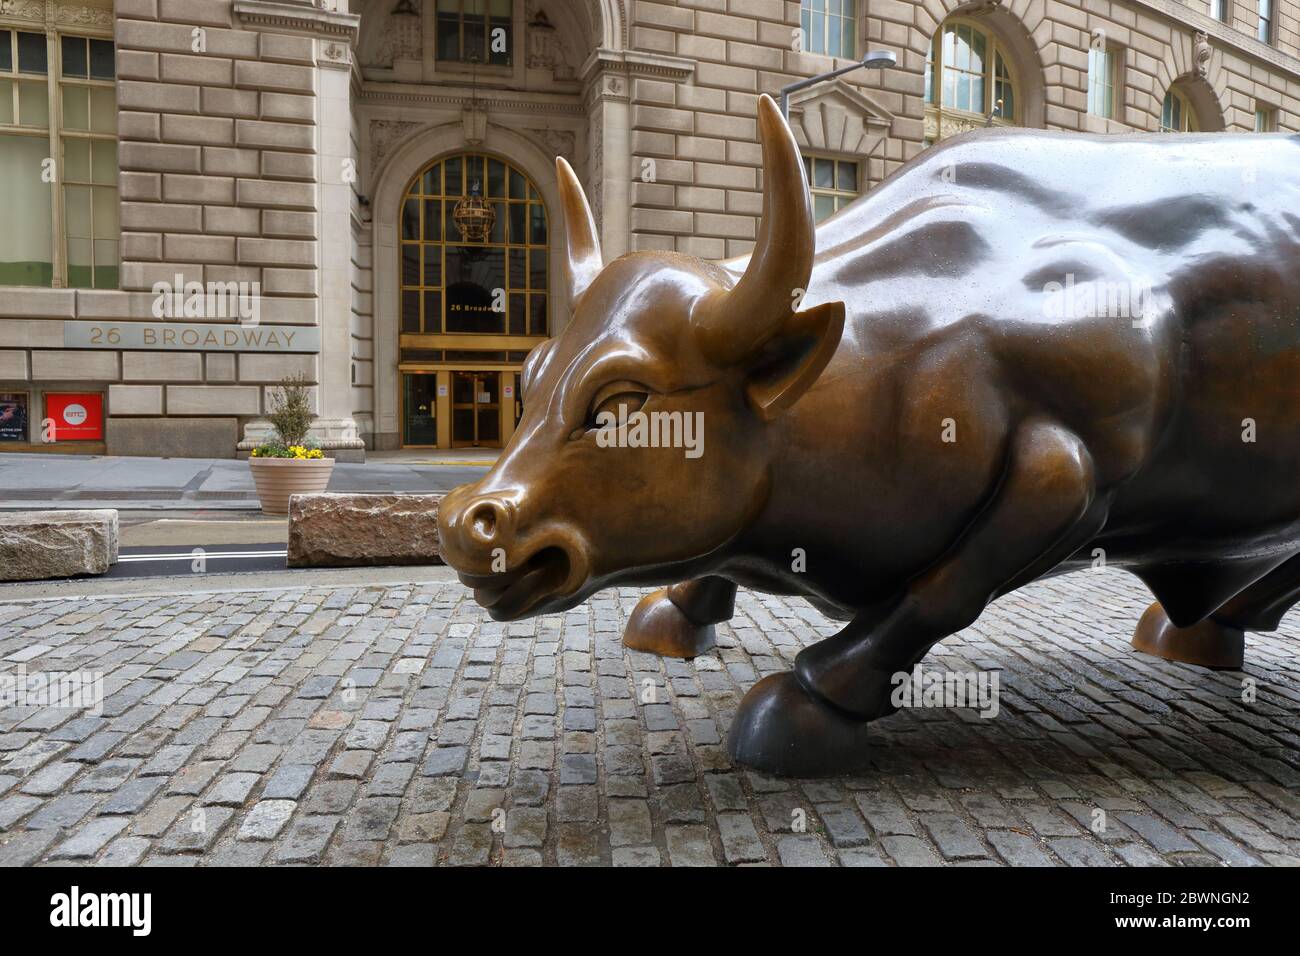 Charging Bull by Arturo Di Modica, in front of 26 Broadway, New York.  A bronze sculpture that has come to represent Wall Street. no people Stock Photo